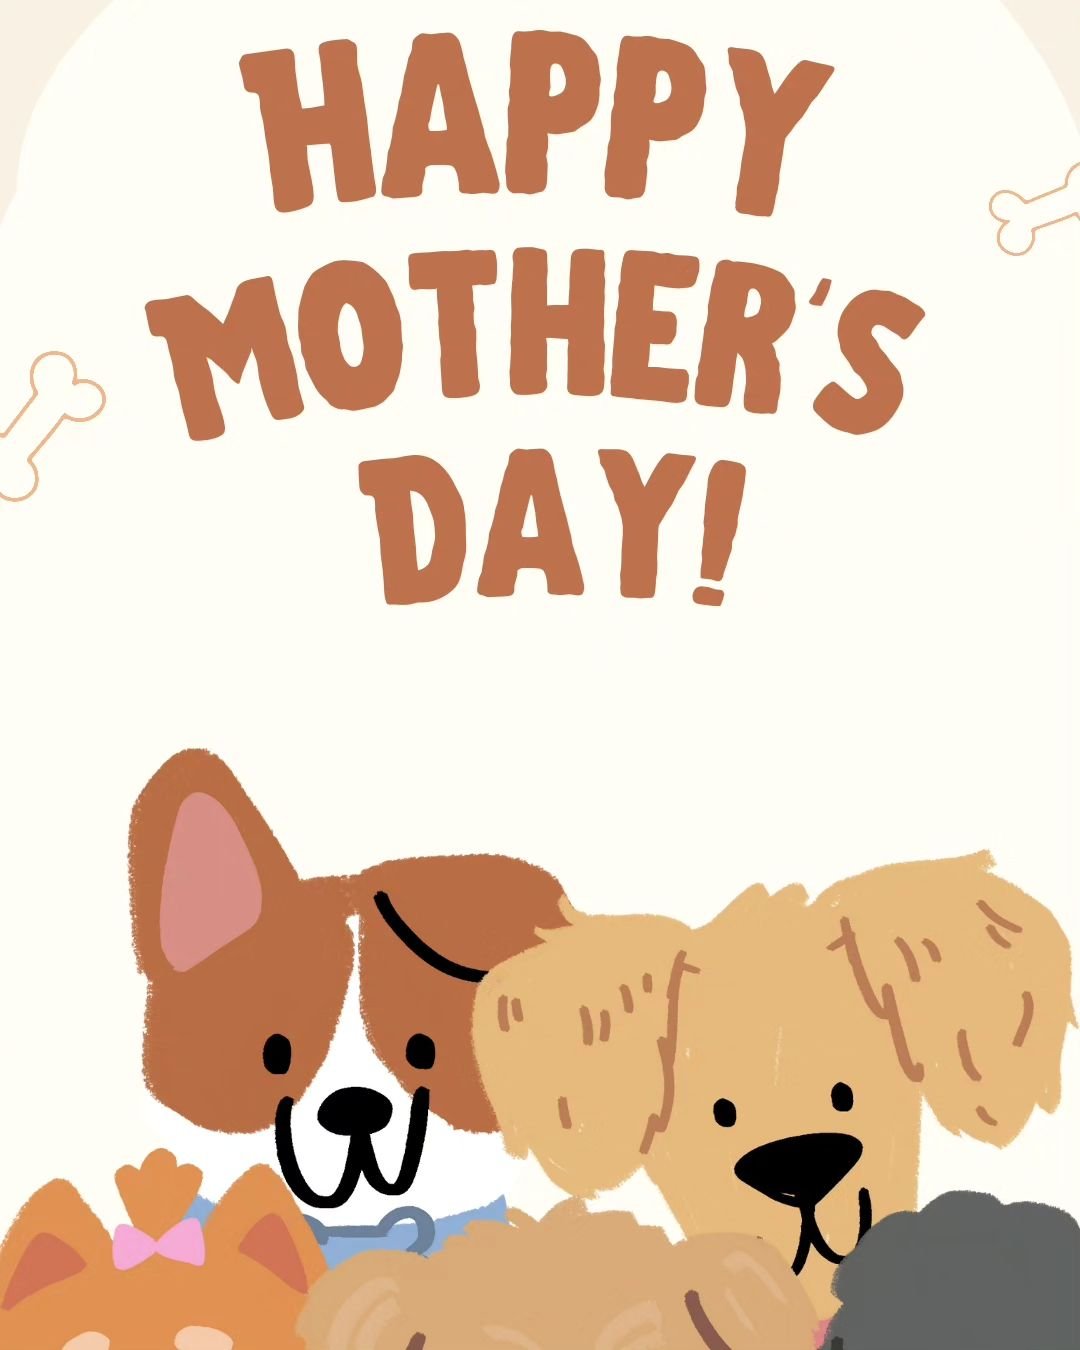 Happy Mother's Day to all the wonderful mommas out there!

#k9fund
#Mothersday2024